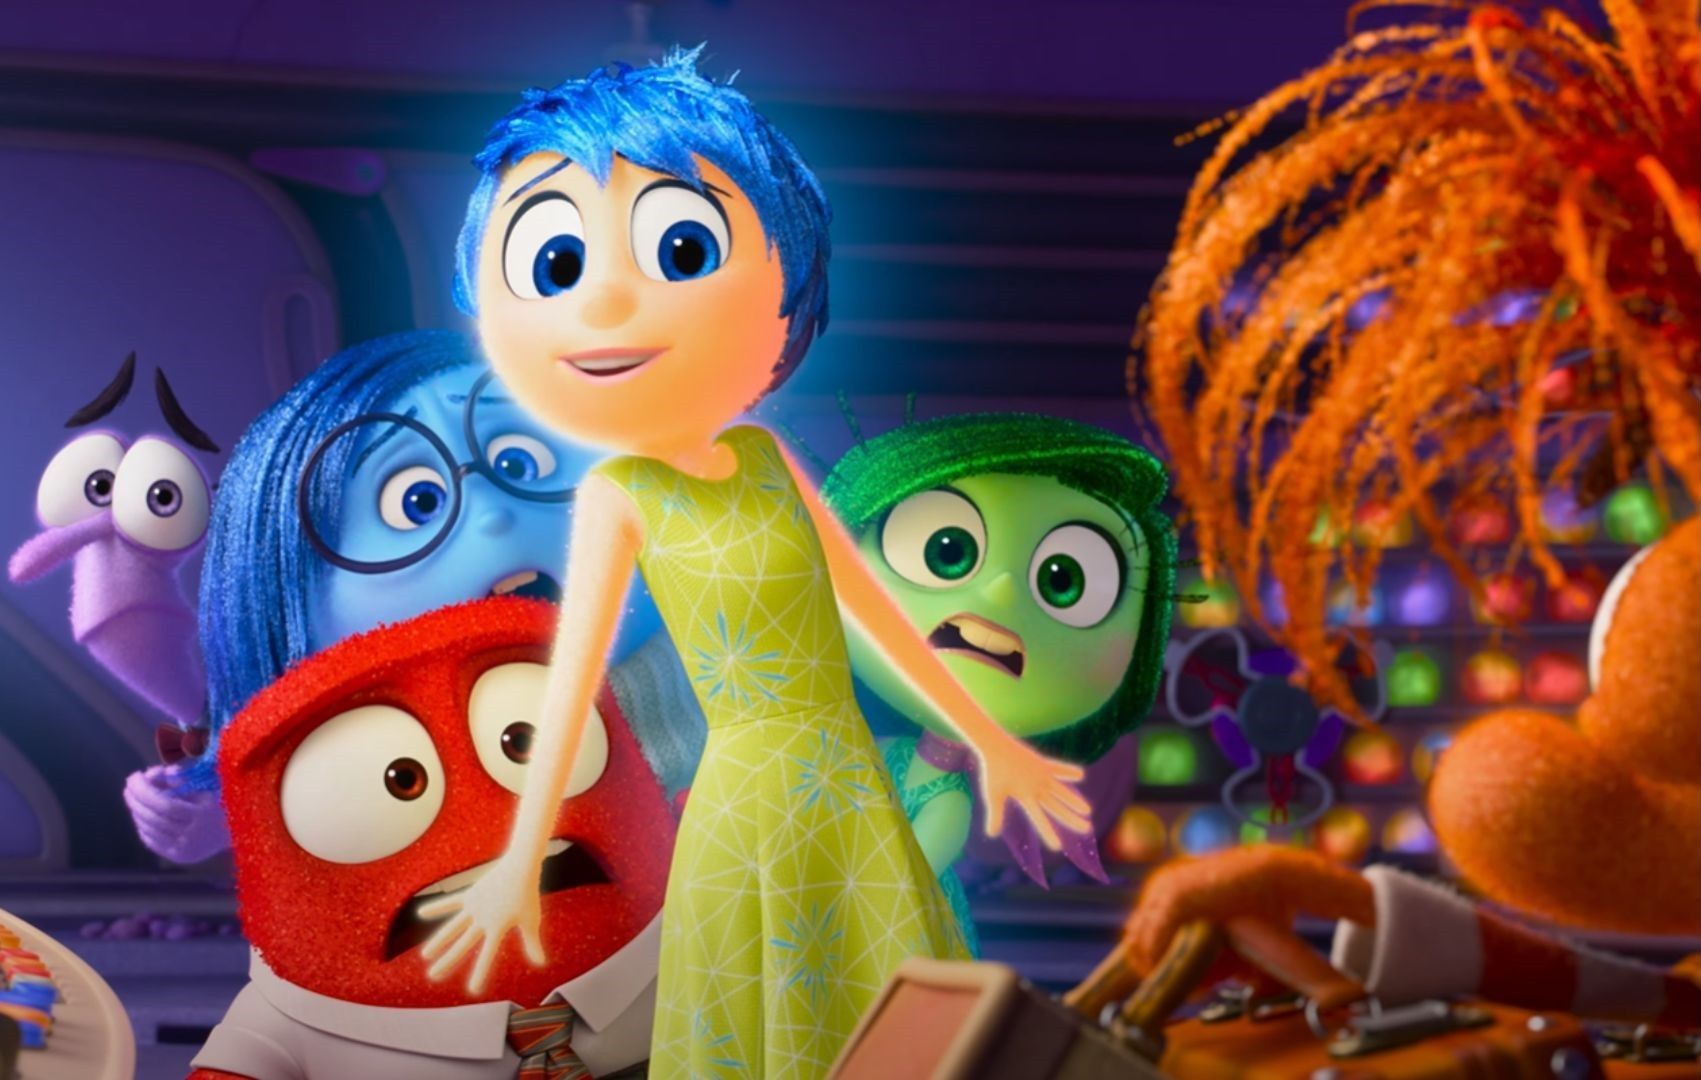 WATCH: Emotions run wild in ‘Inside Out 2’ official trailer